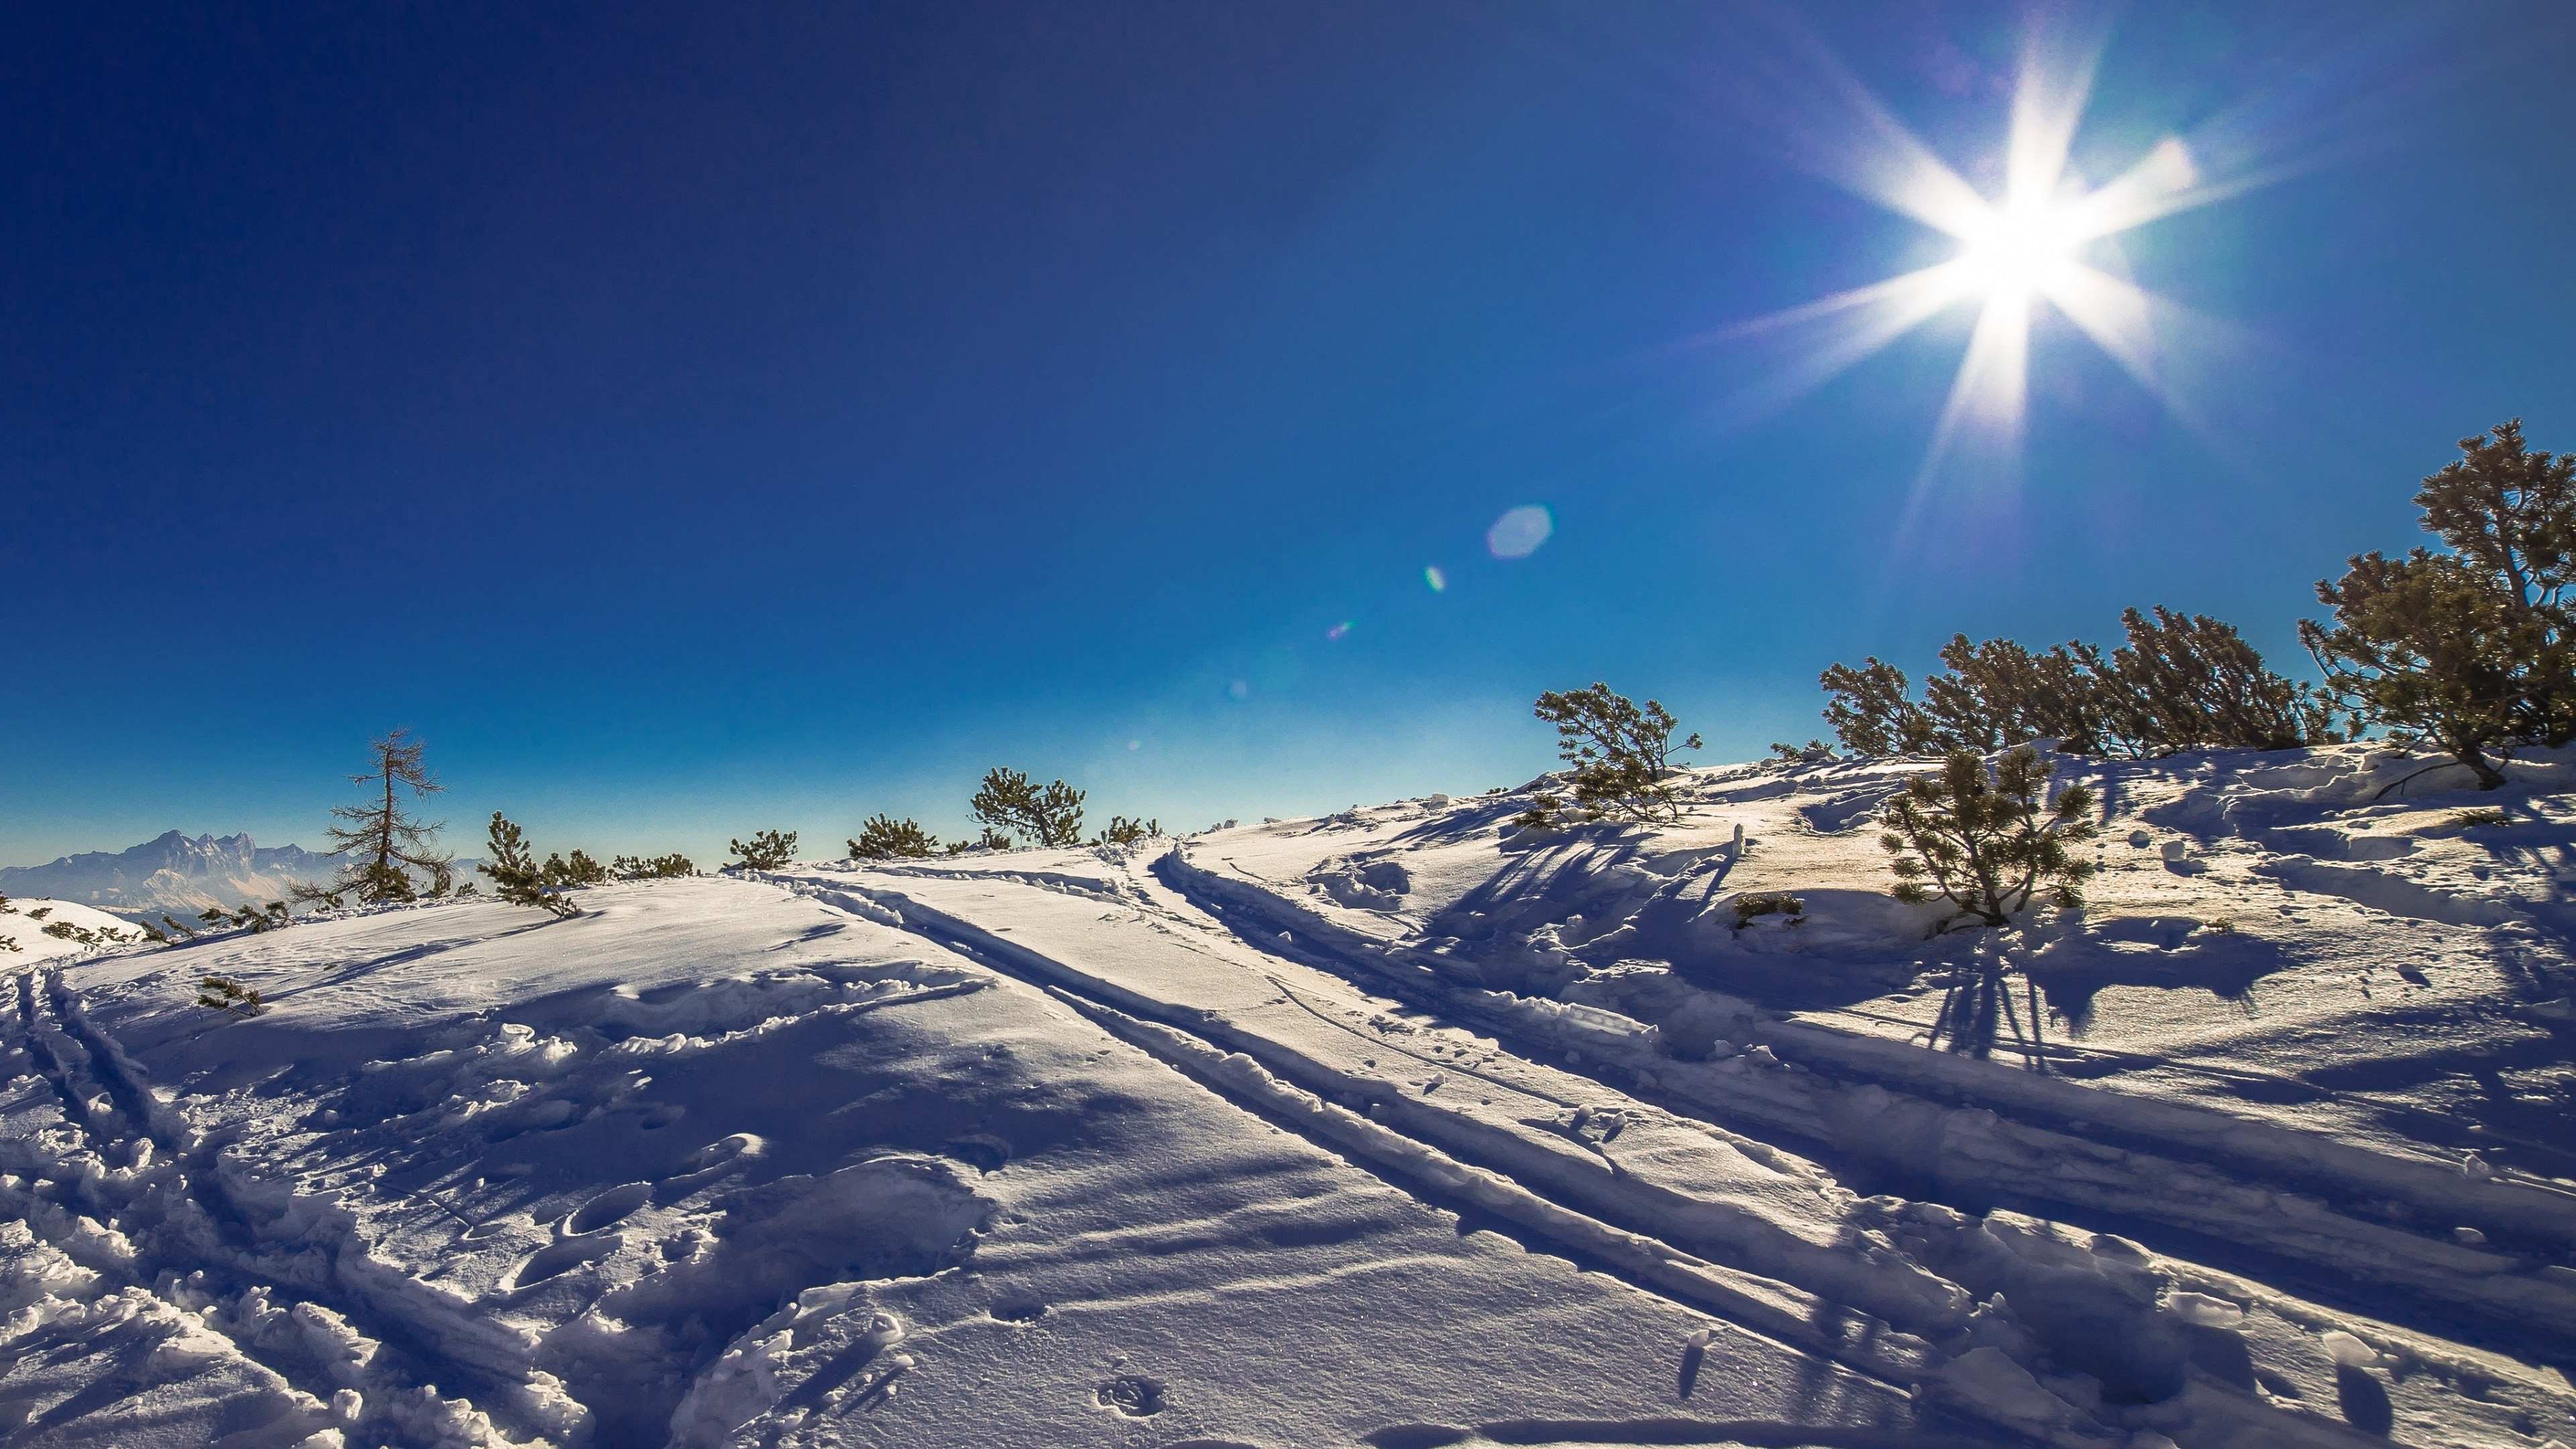 Sunny day in this Winter landscape wallpaper 3840x2160